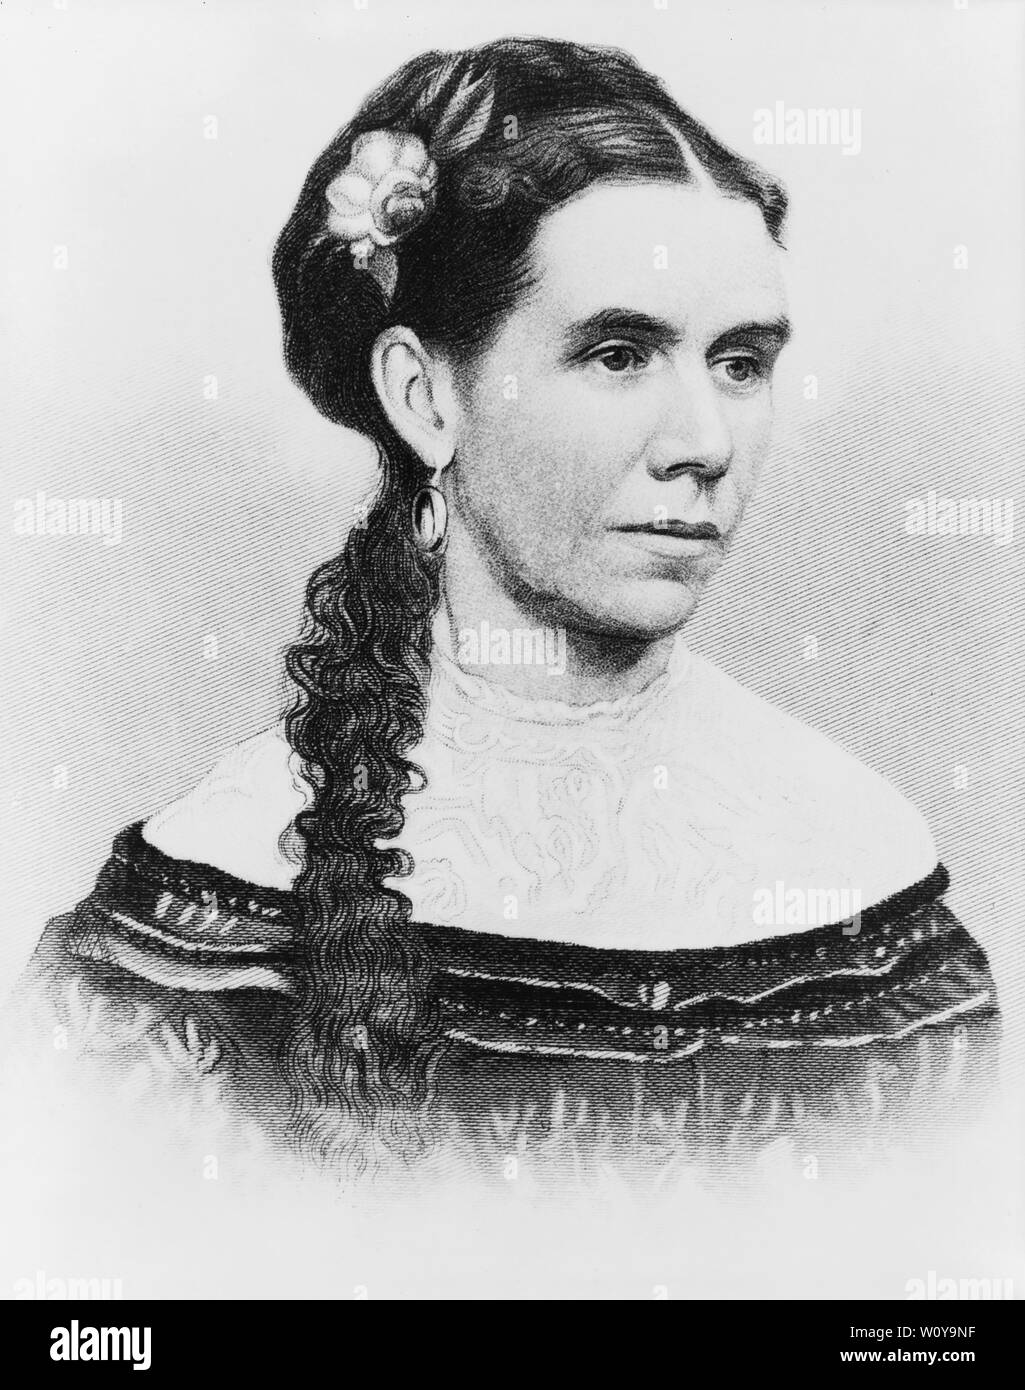 Martha Johnson Patterson, Daughter of U.S. President Andrew Johnson and First Lady Eliza McCardle Johnson, served as Hostess for her Father during his Presidency due to her Mother's Illness, Head and Shoulders Portrait, Engraving by J.C. Buttre, 1880 Stock Photo